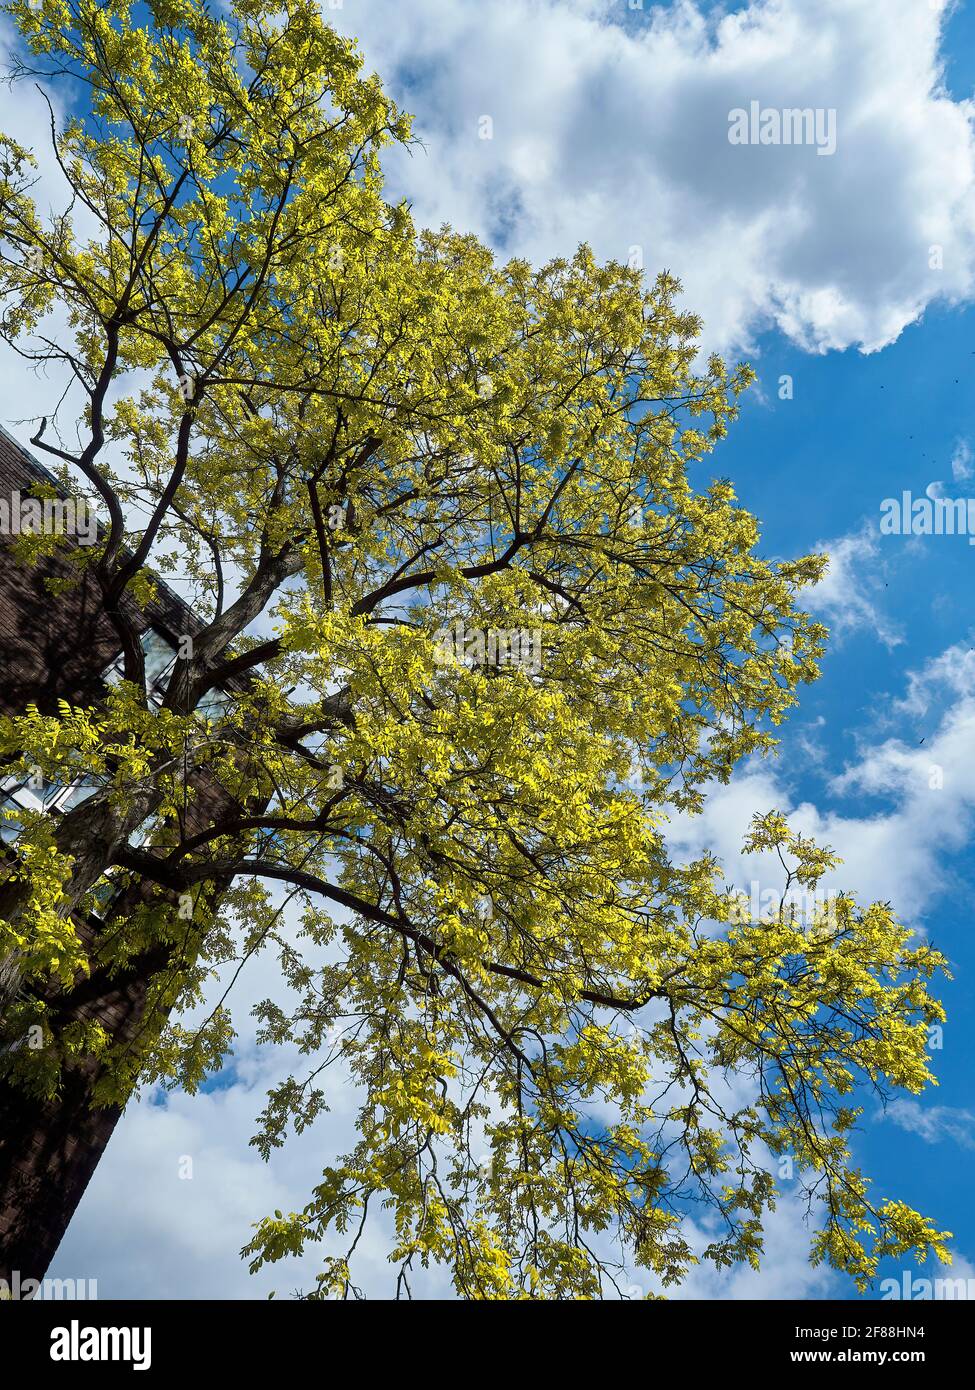 The bright yellow, sunlit leaves of a locust tree near flats, against a bright blue sky, with fluffy white clouds. Stock Photo